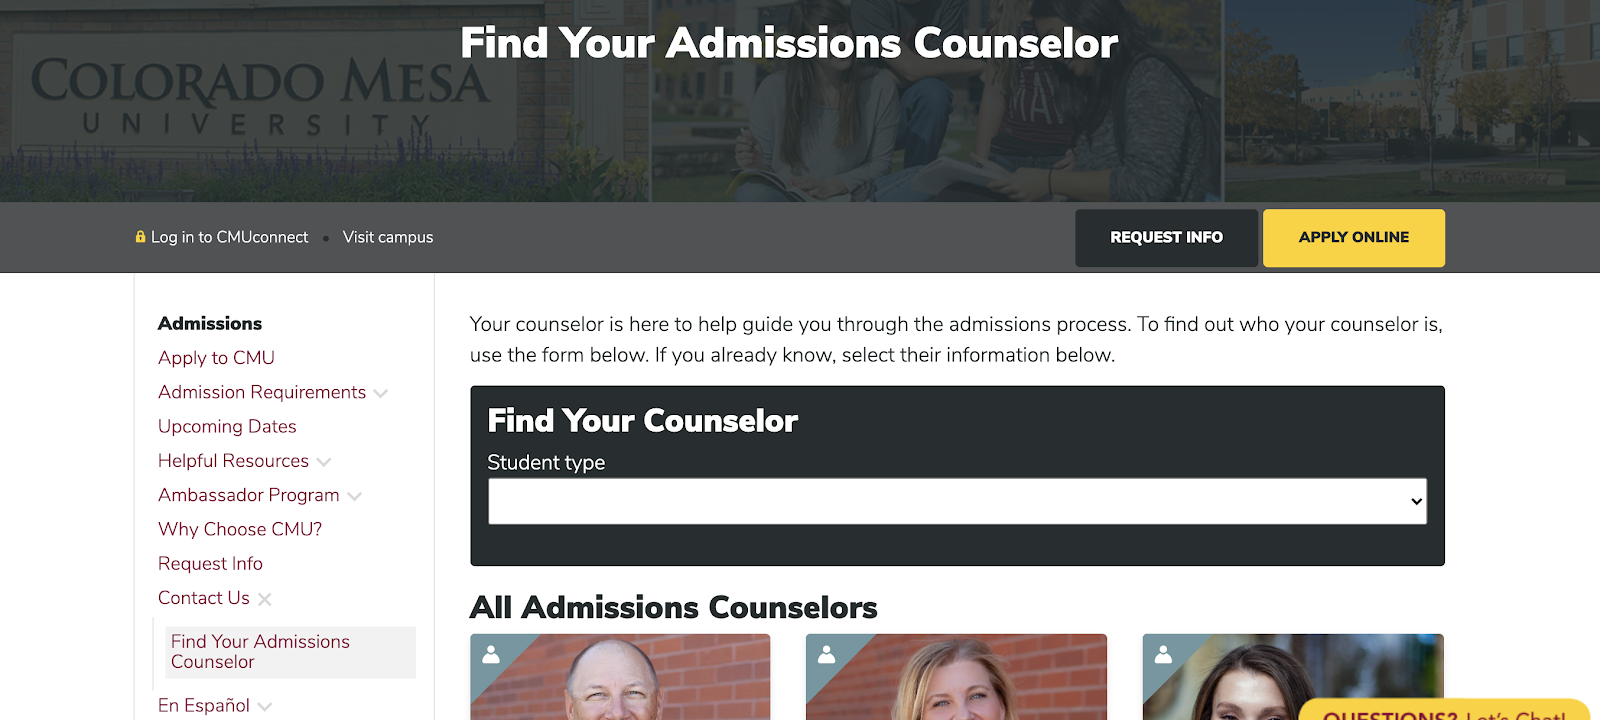 Find admissions counselor